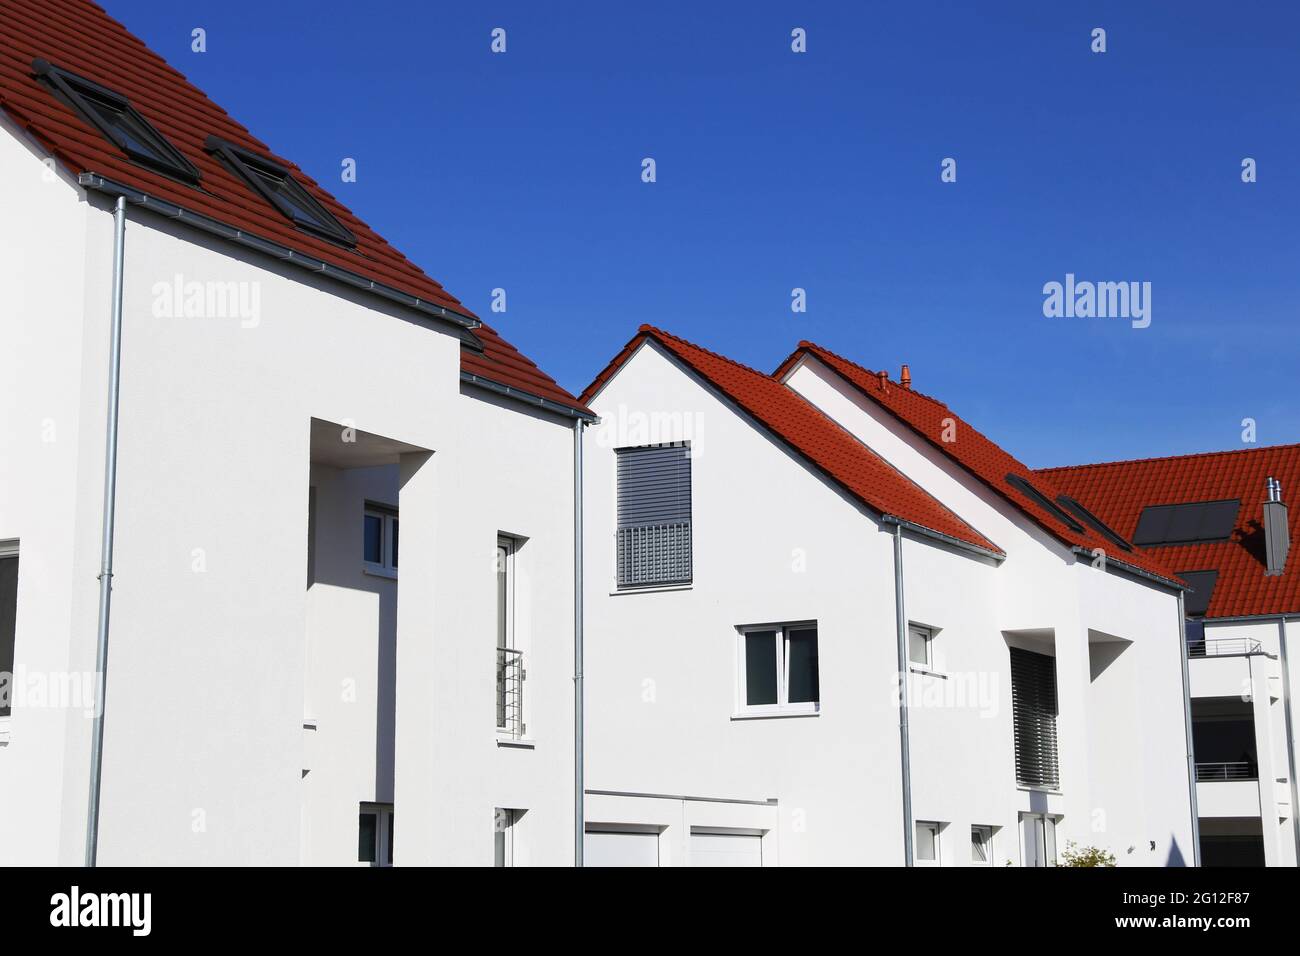 New single family house in a new development area. Stock Photo